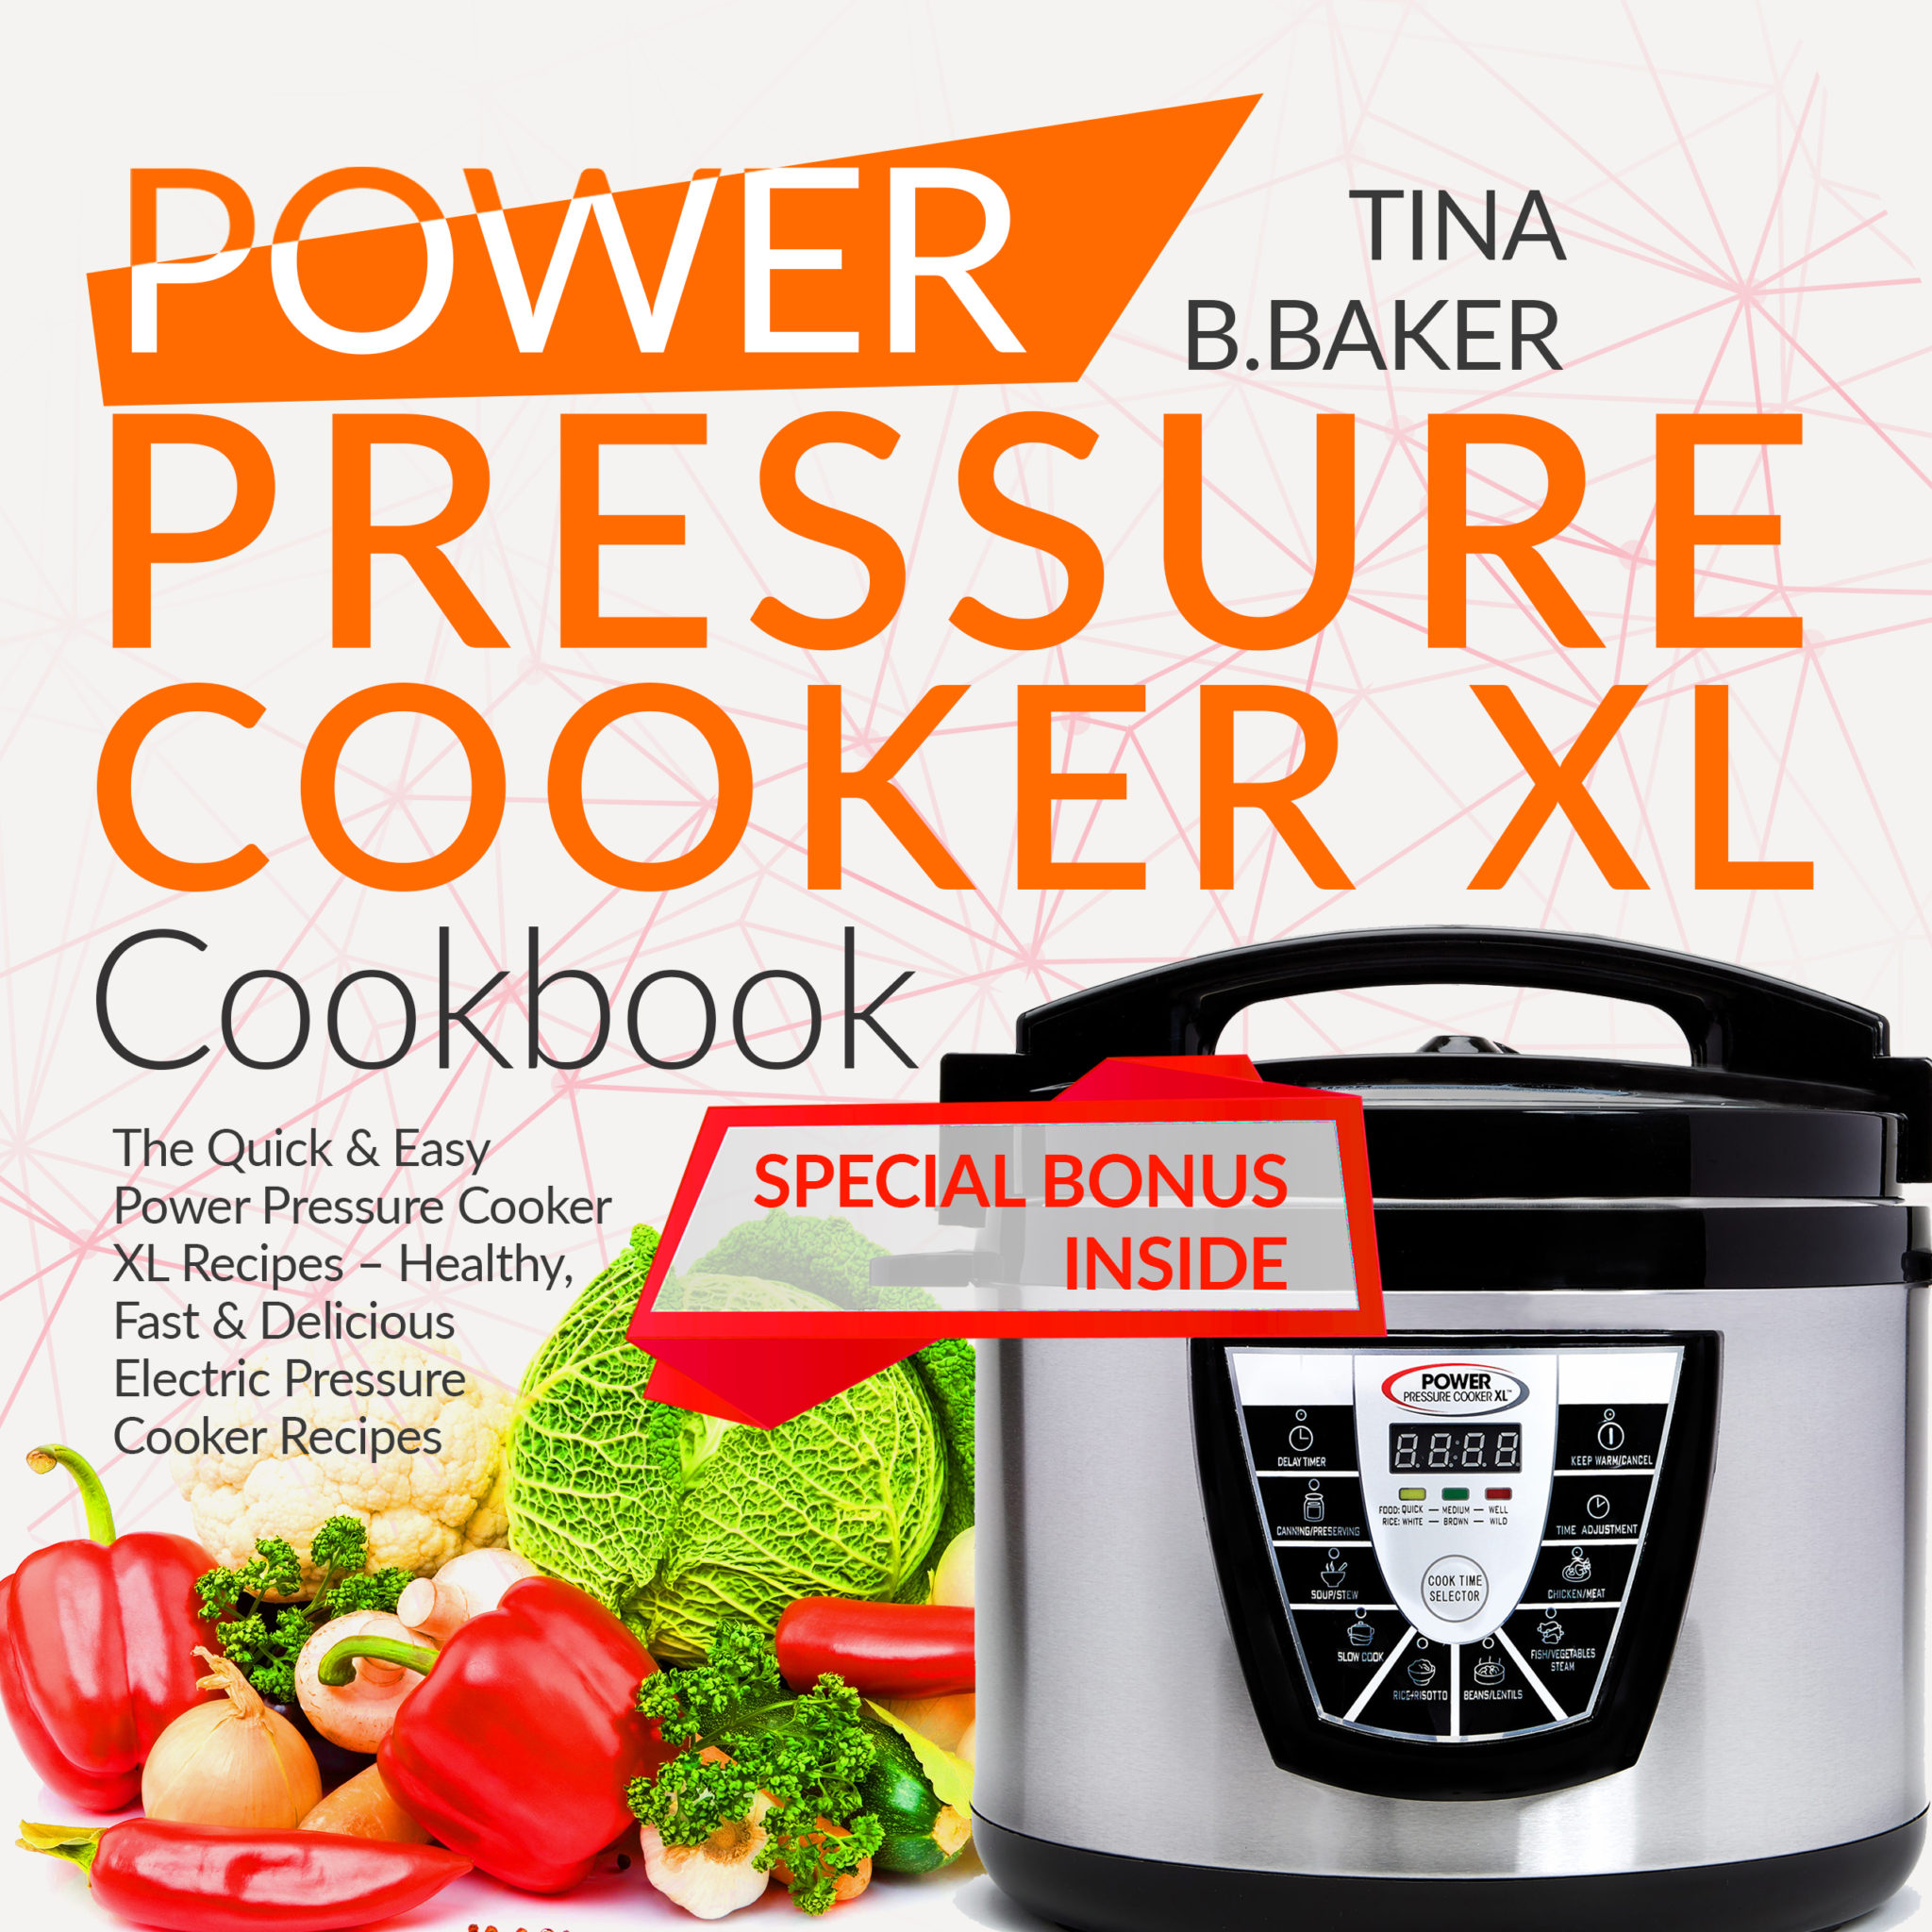 FREE: Power Pressure Cooker XL Cookbook: The Quick and Easy Power Pressure Cooker XL Recipes – Healthy, Fast and Delicious Electric Pressure Cooker Recipes (Plus Photos, Nutrition Facts) by Tina B.Baker